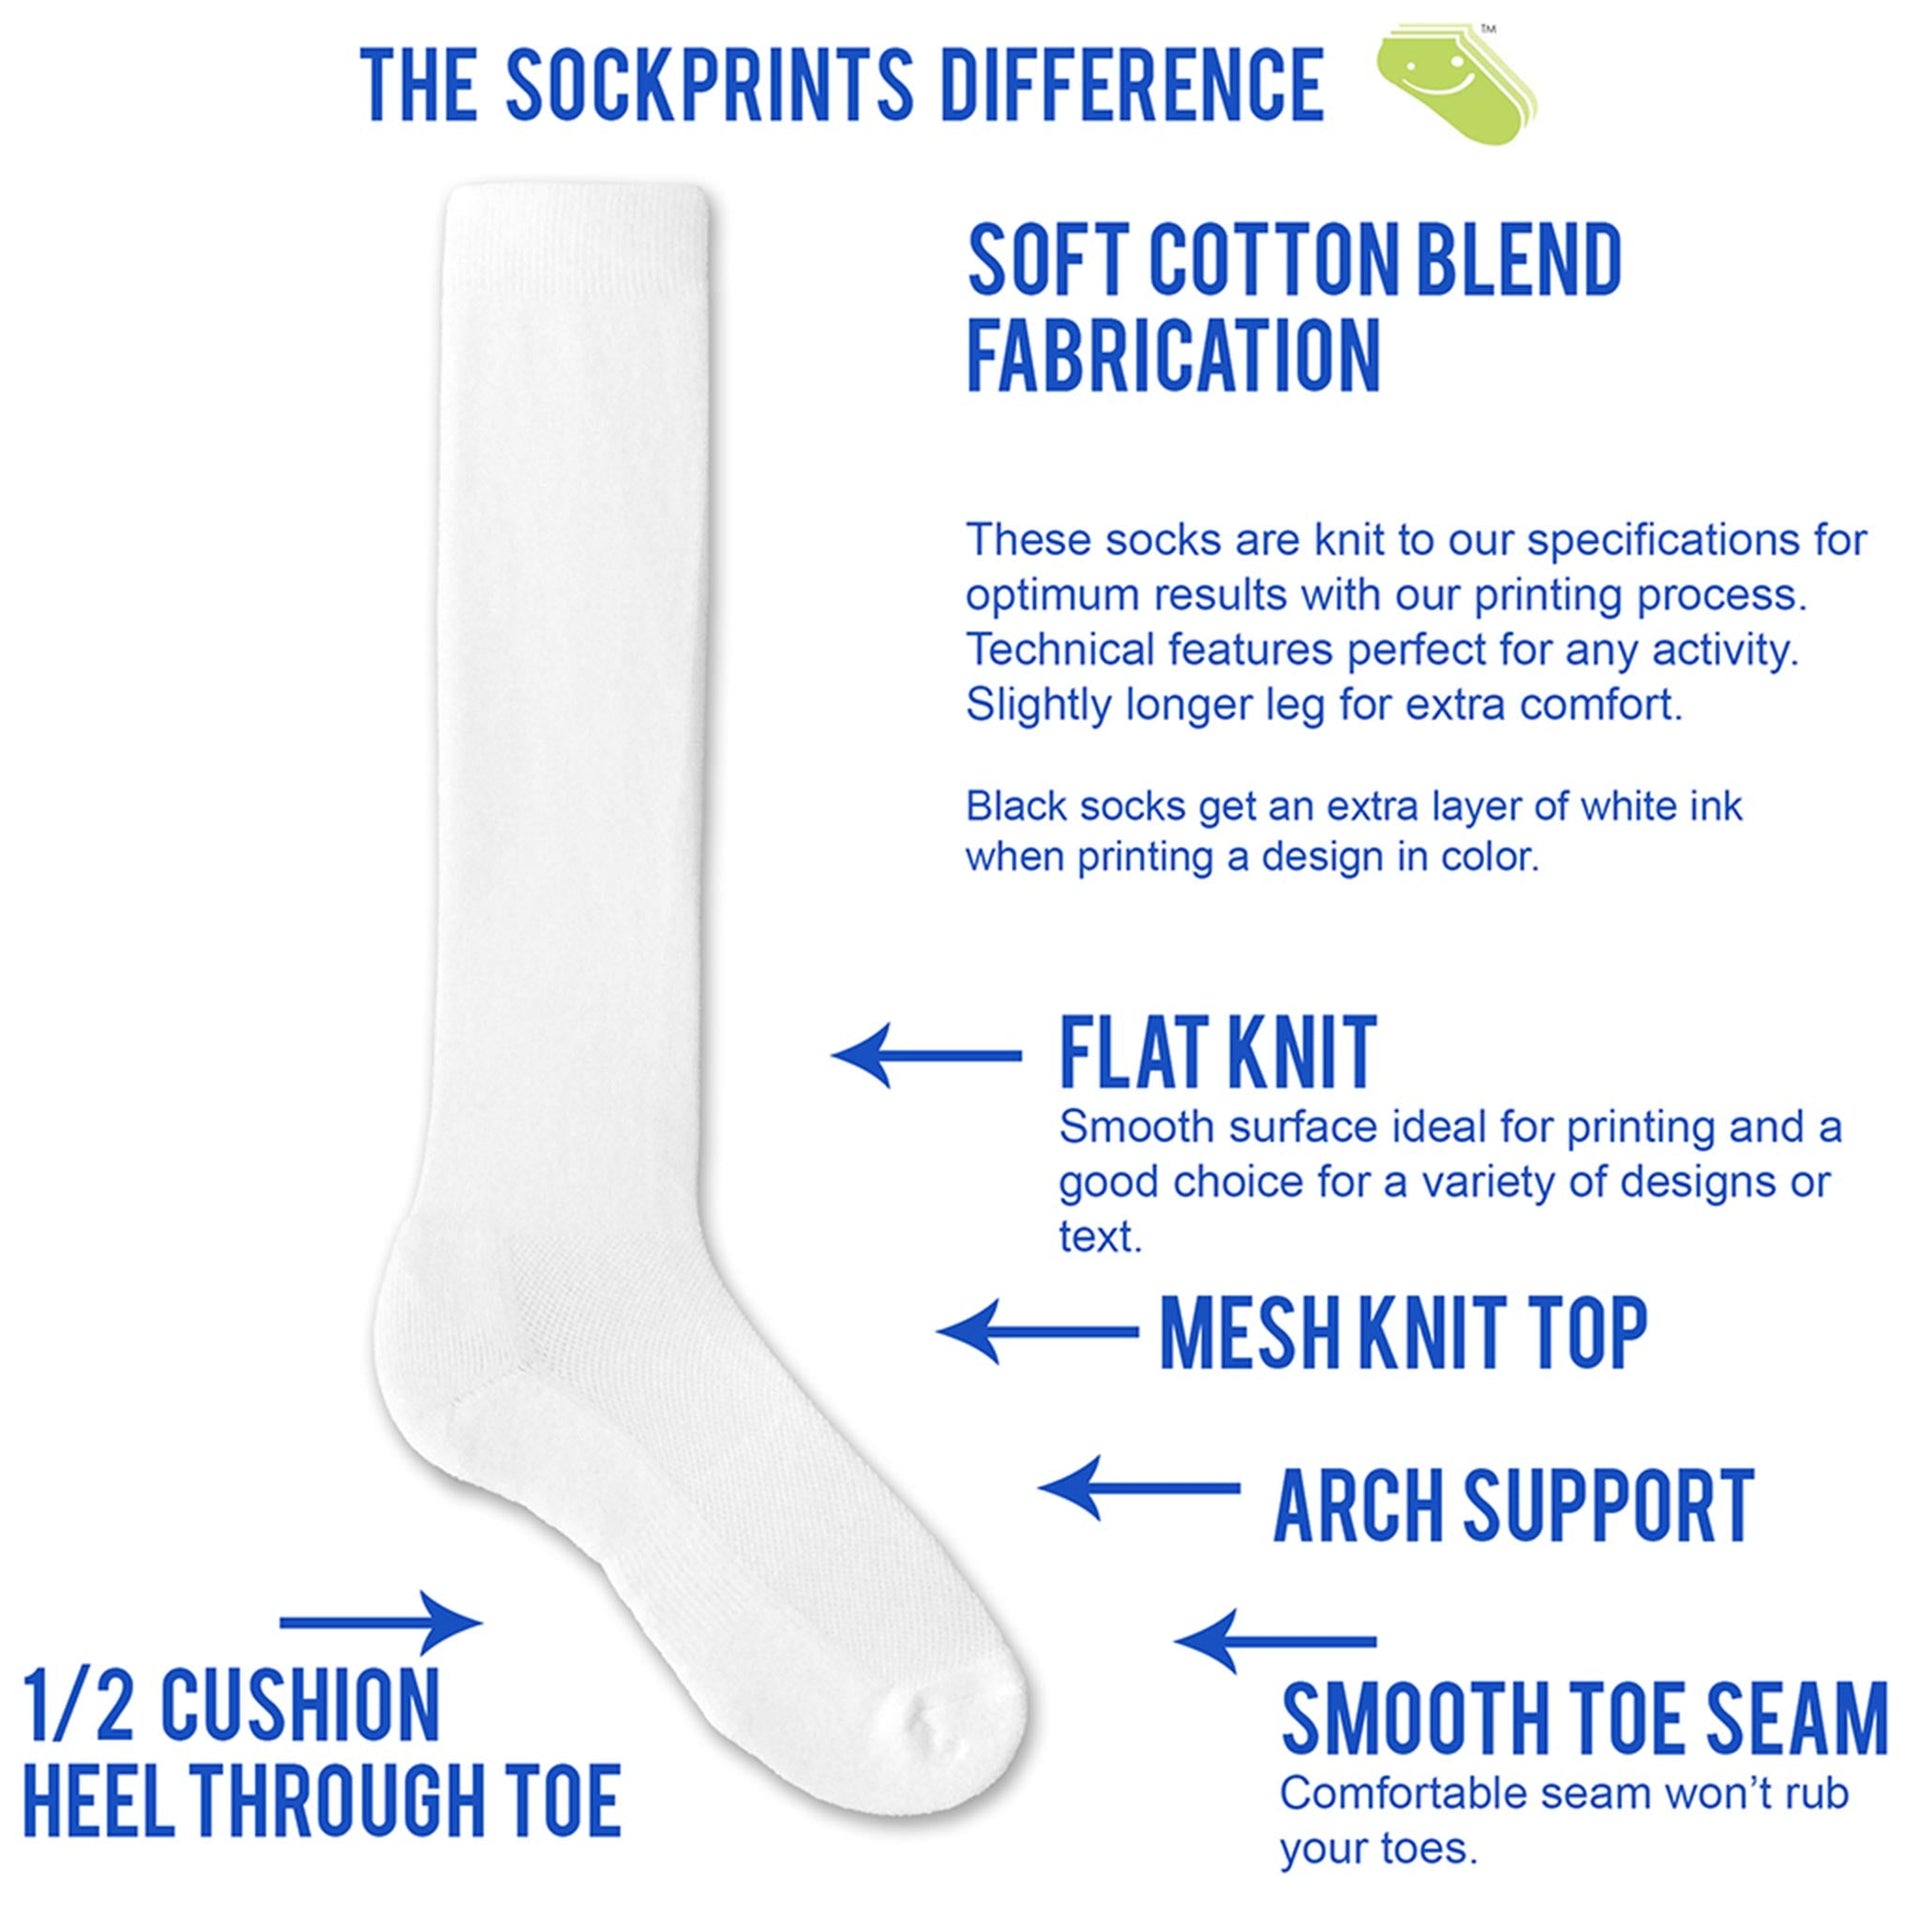 Sock information sheet and how the socks are comfortable and different.